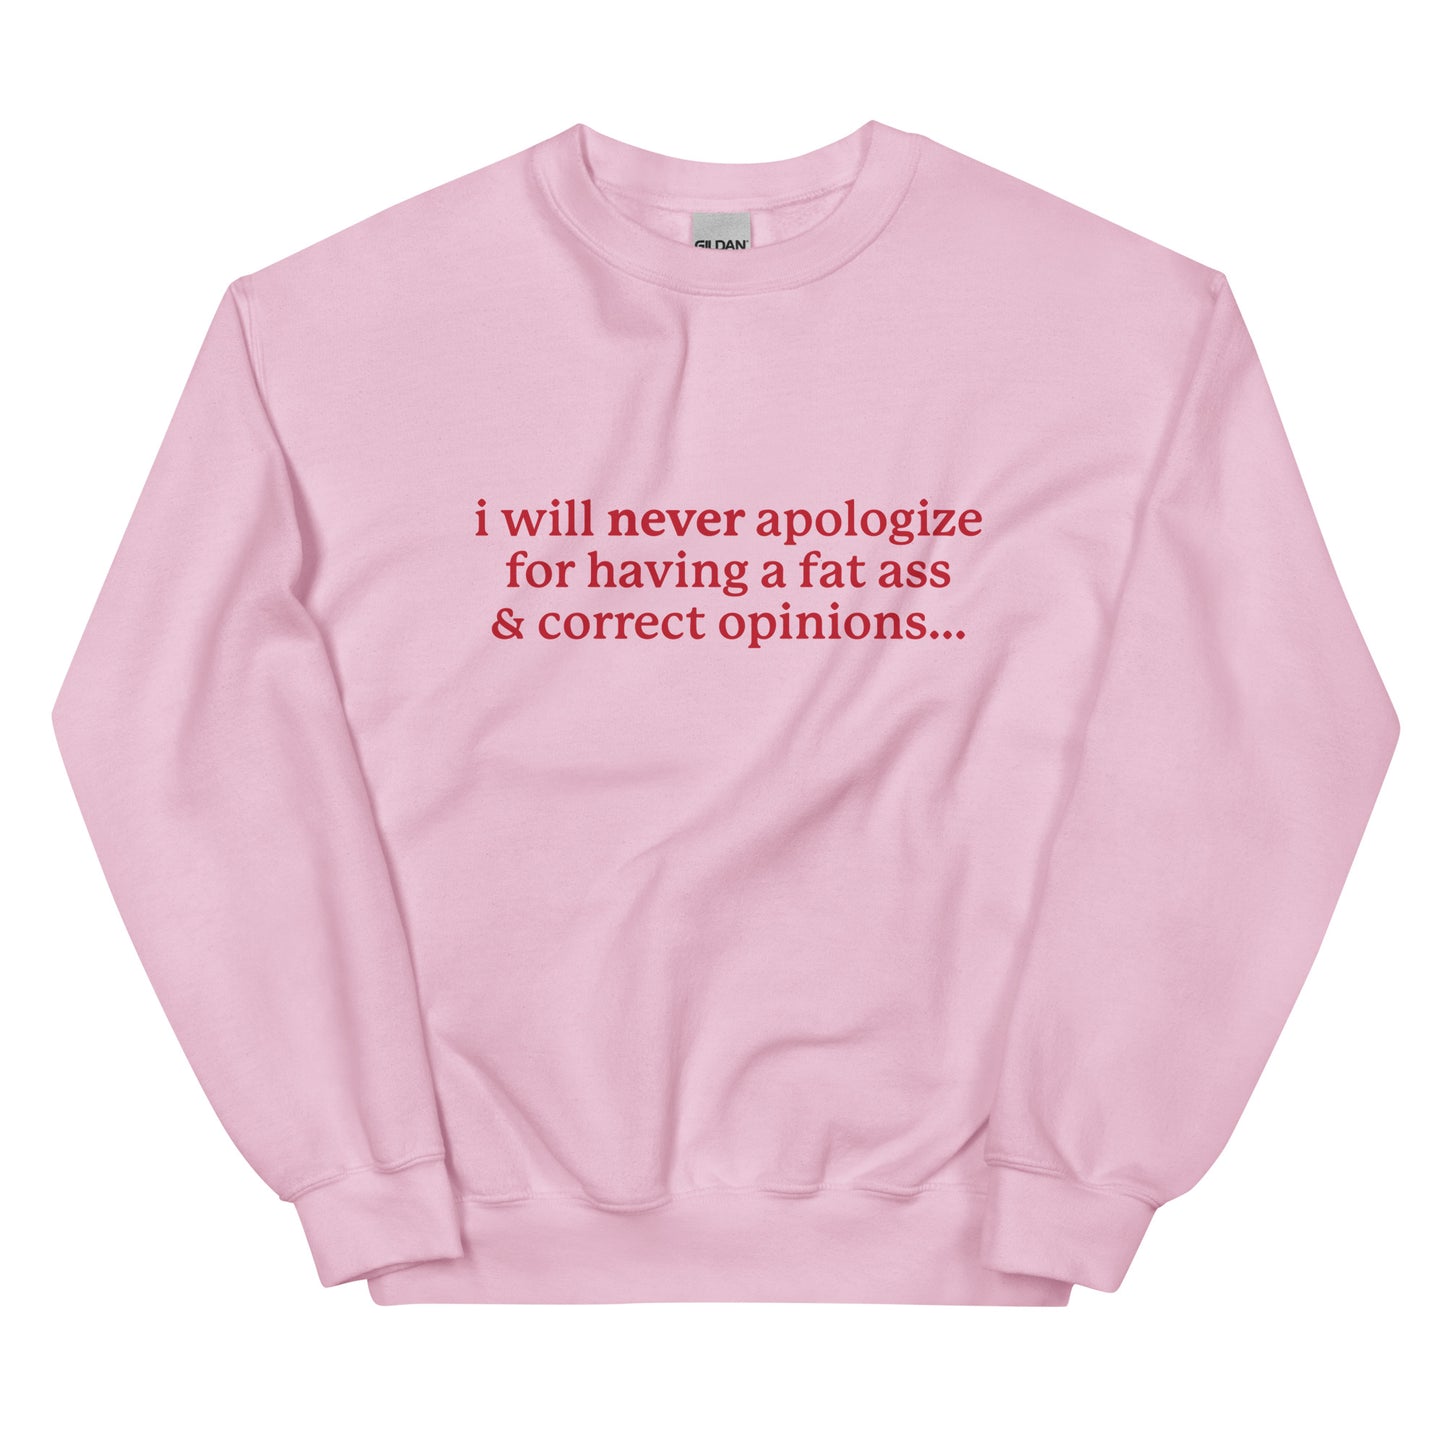 I Will Never Apologize (Fat Ass & Correct Opinions) Unisex Sweatshirt